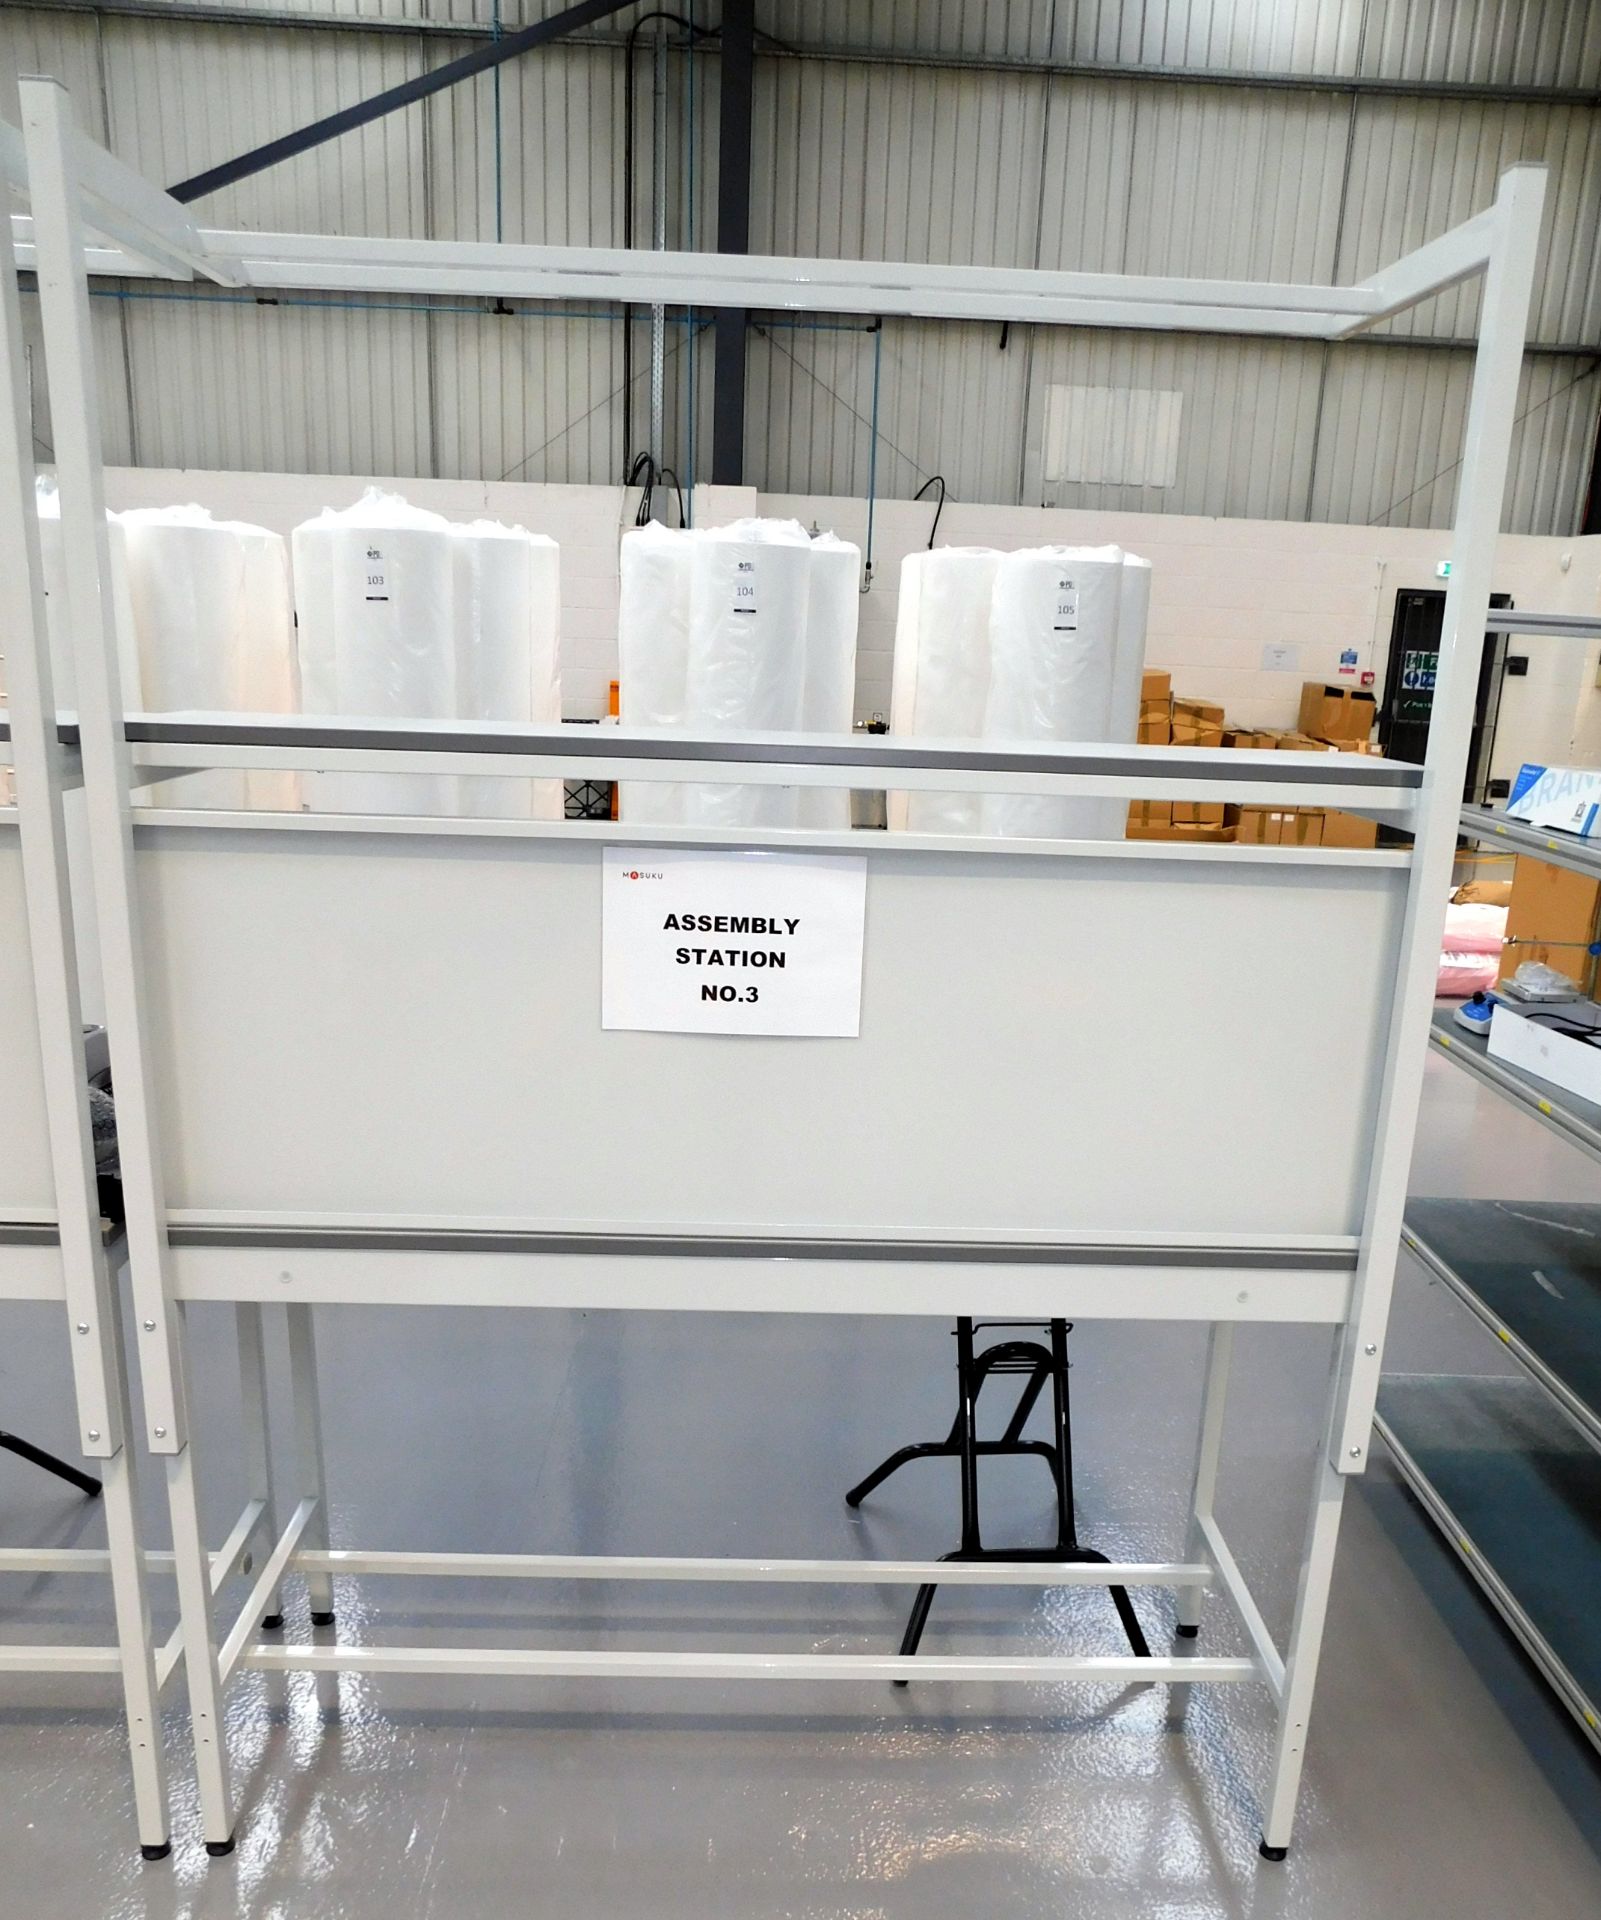 Packaging Bench with Over Shelf & Folding Stool (Bench Approx. 150cm (W) x 64cm (D) x 210cm (H)) - Image 3 of 3